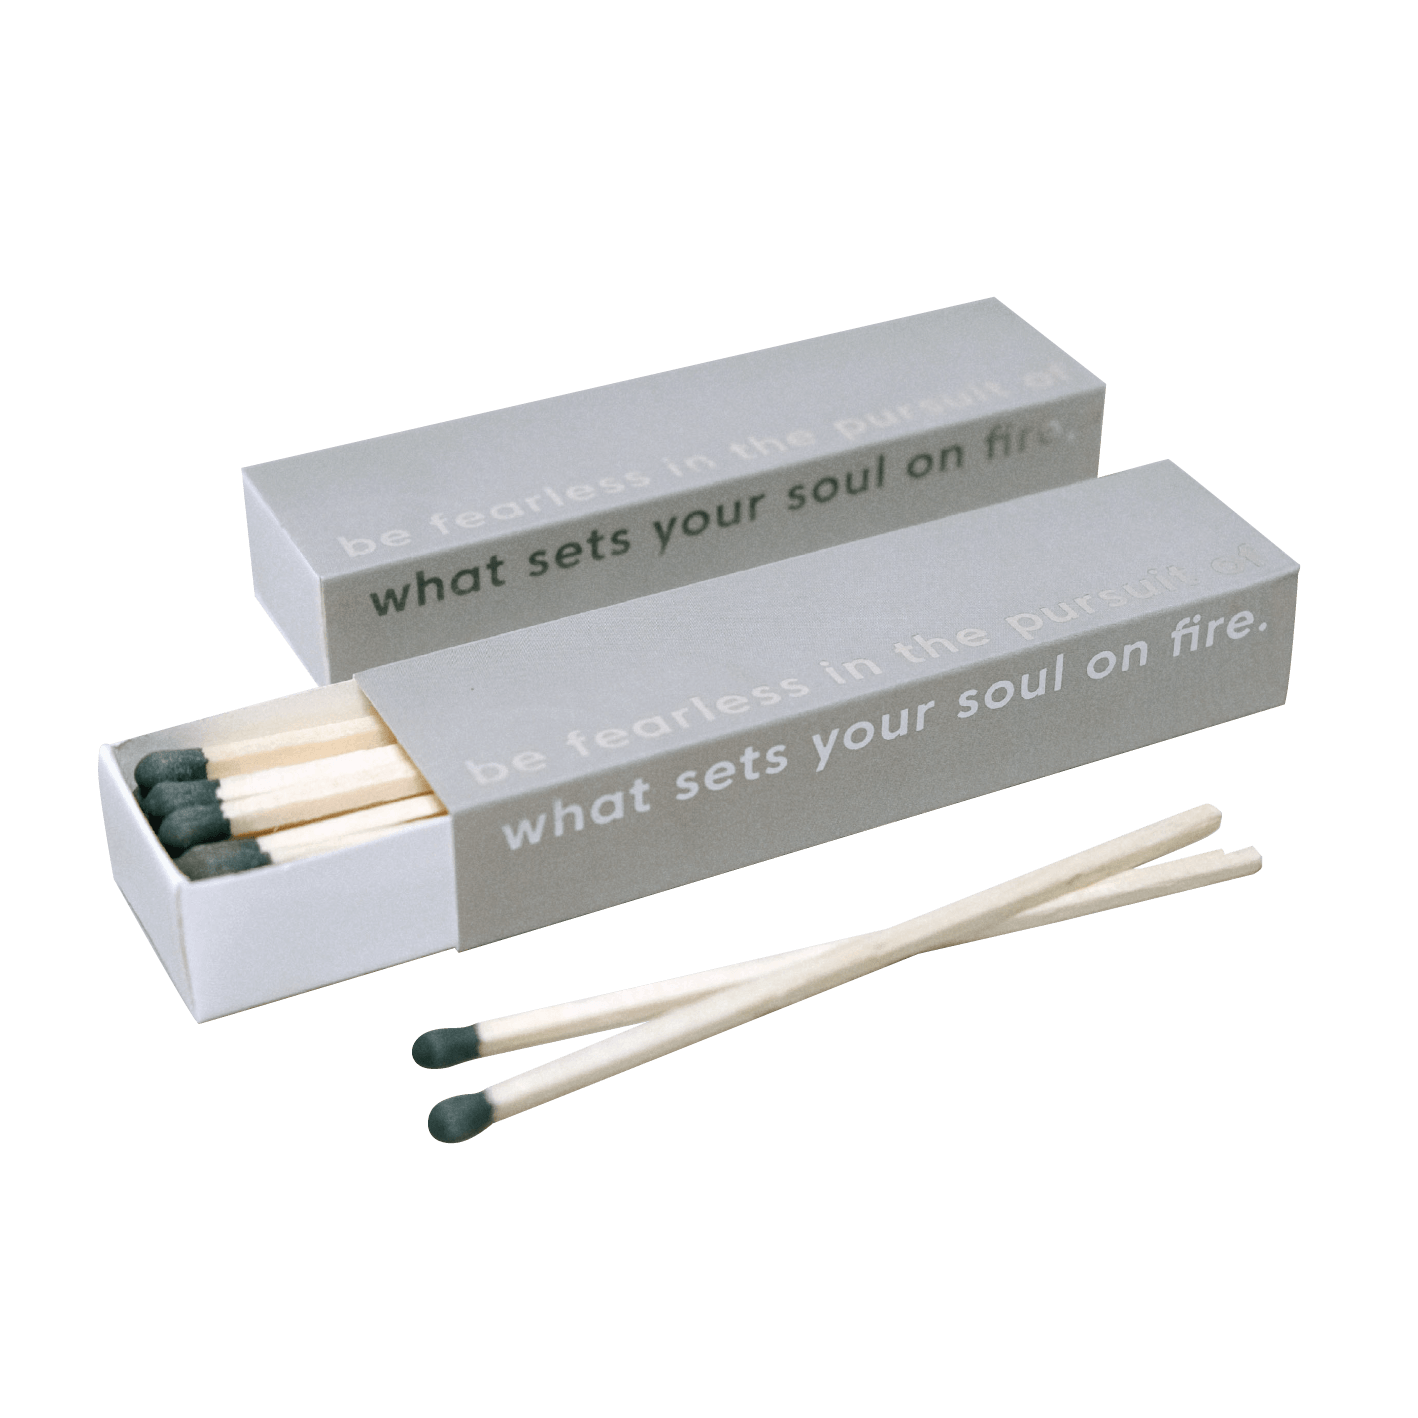 10cm long matches - supplement for soul